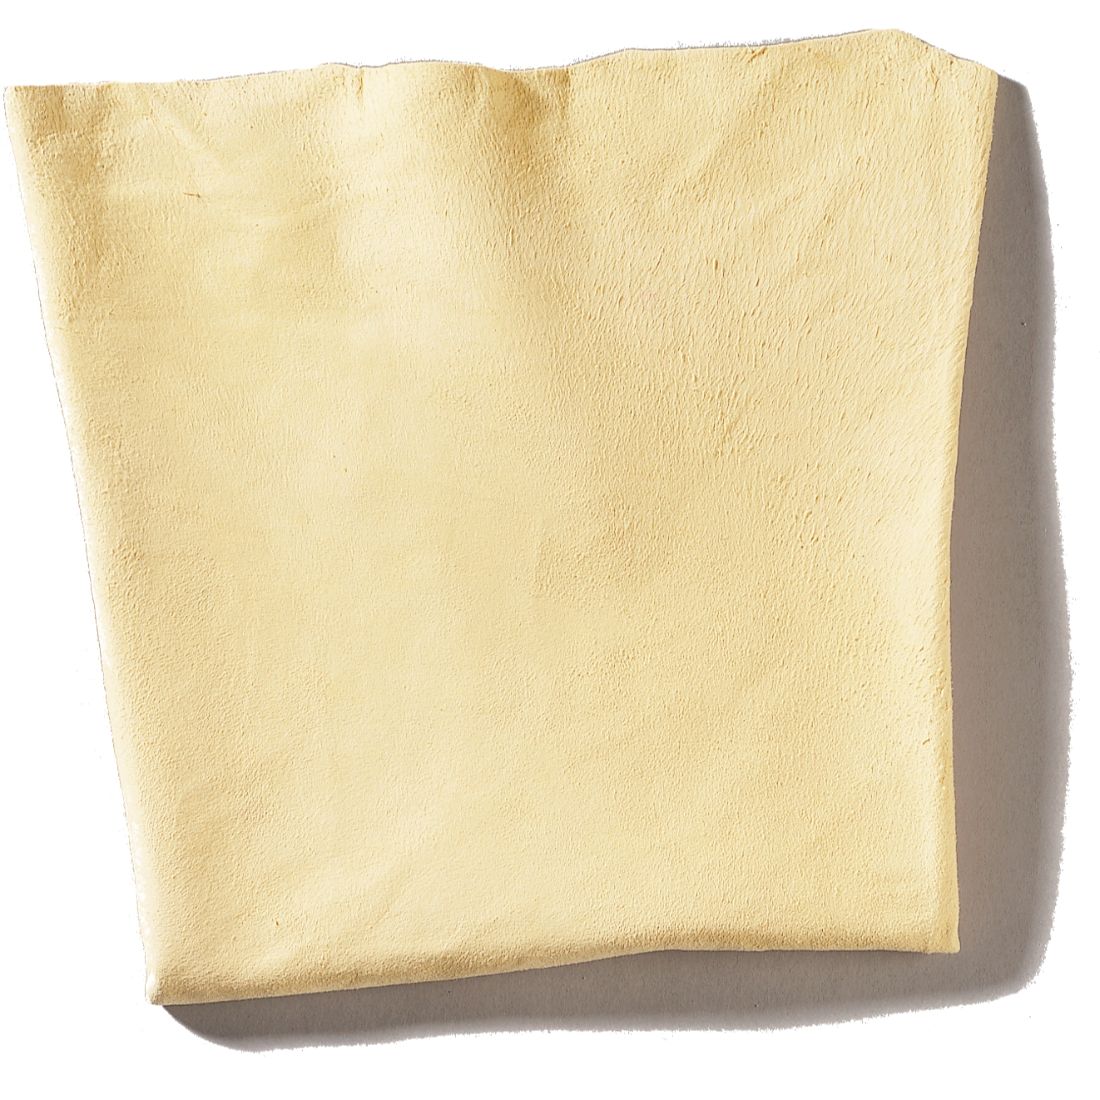 CleanSource® Large Genuine Leather Chamois Cloth - Caterclean Supplies